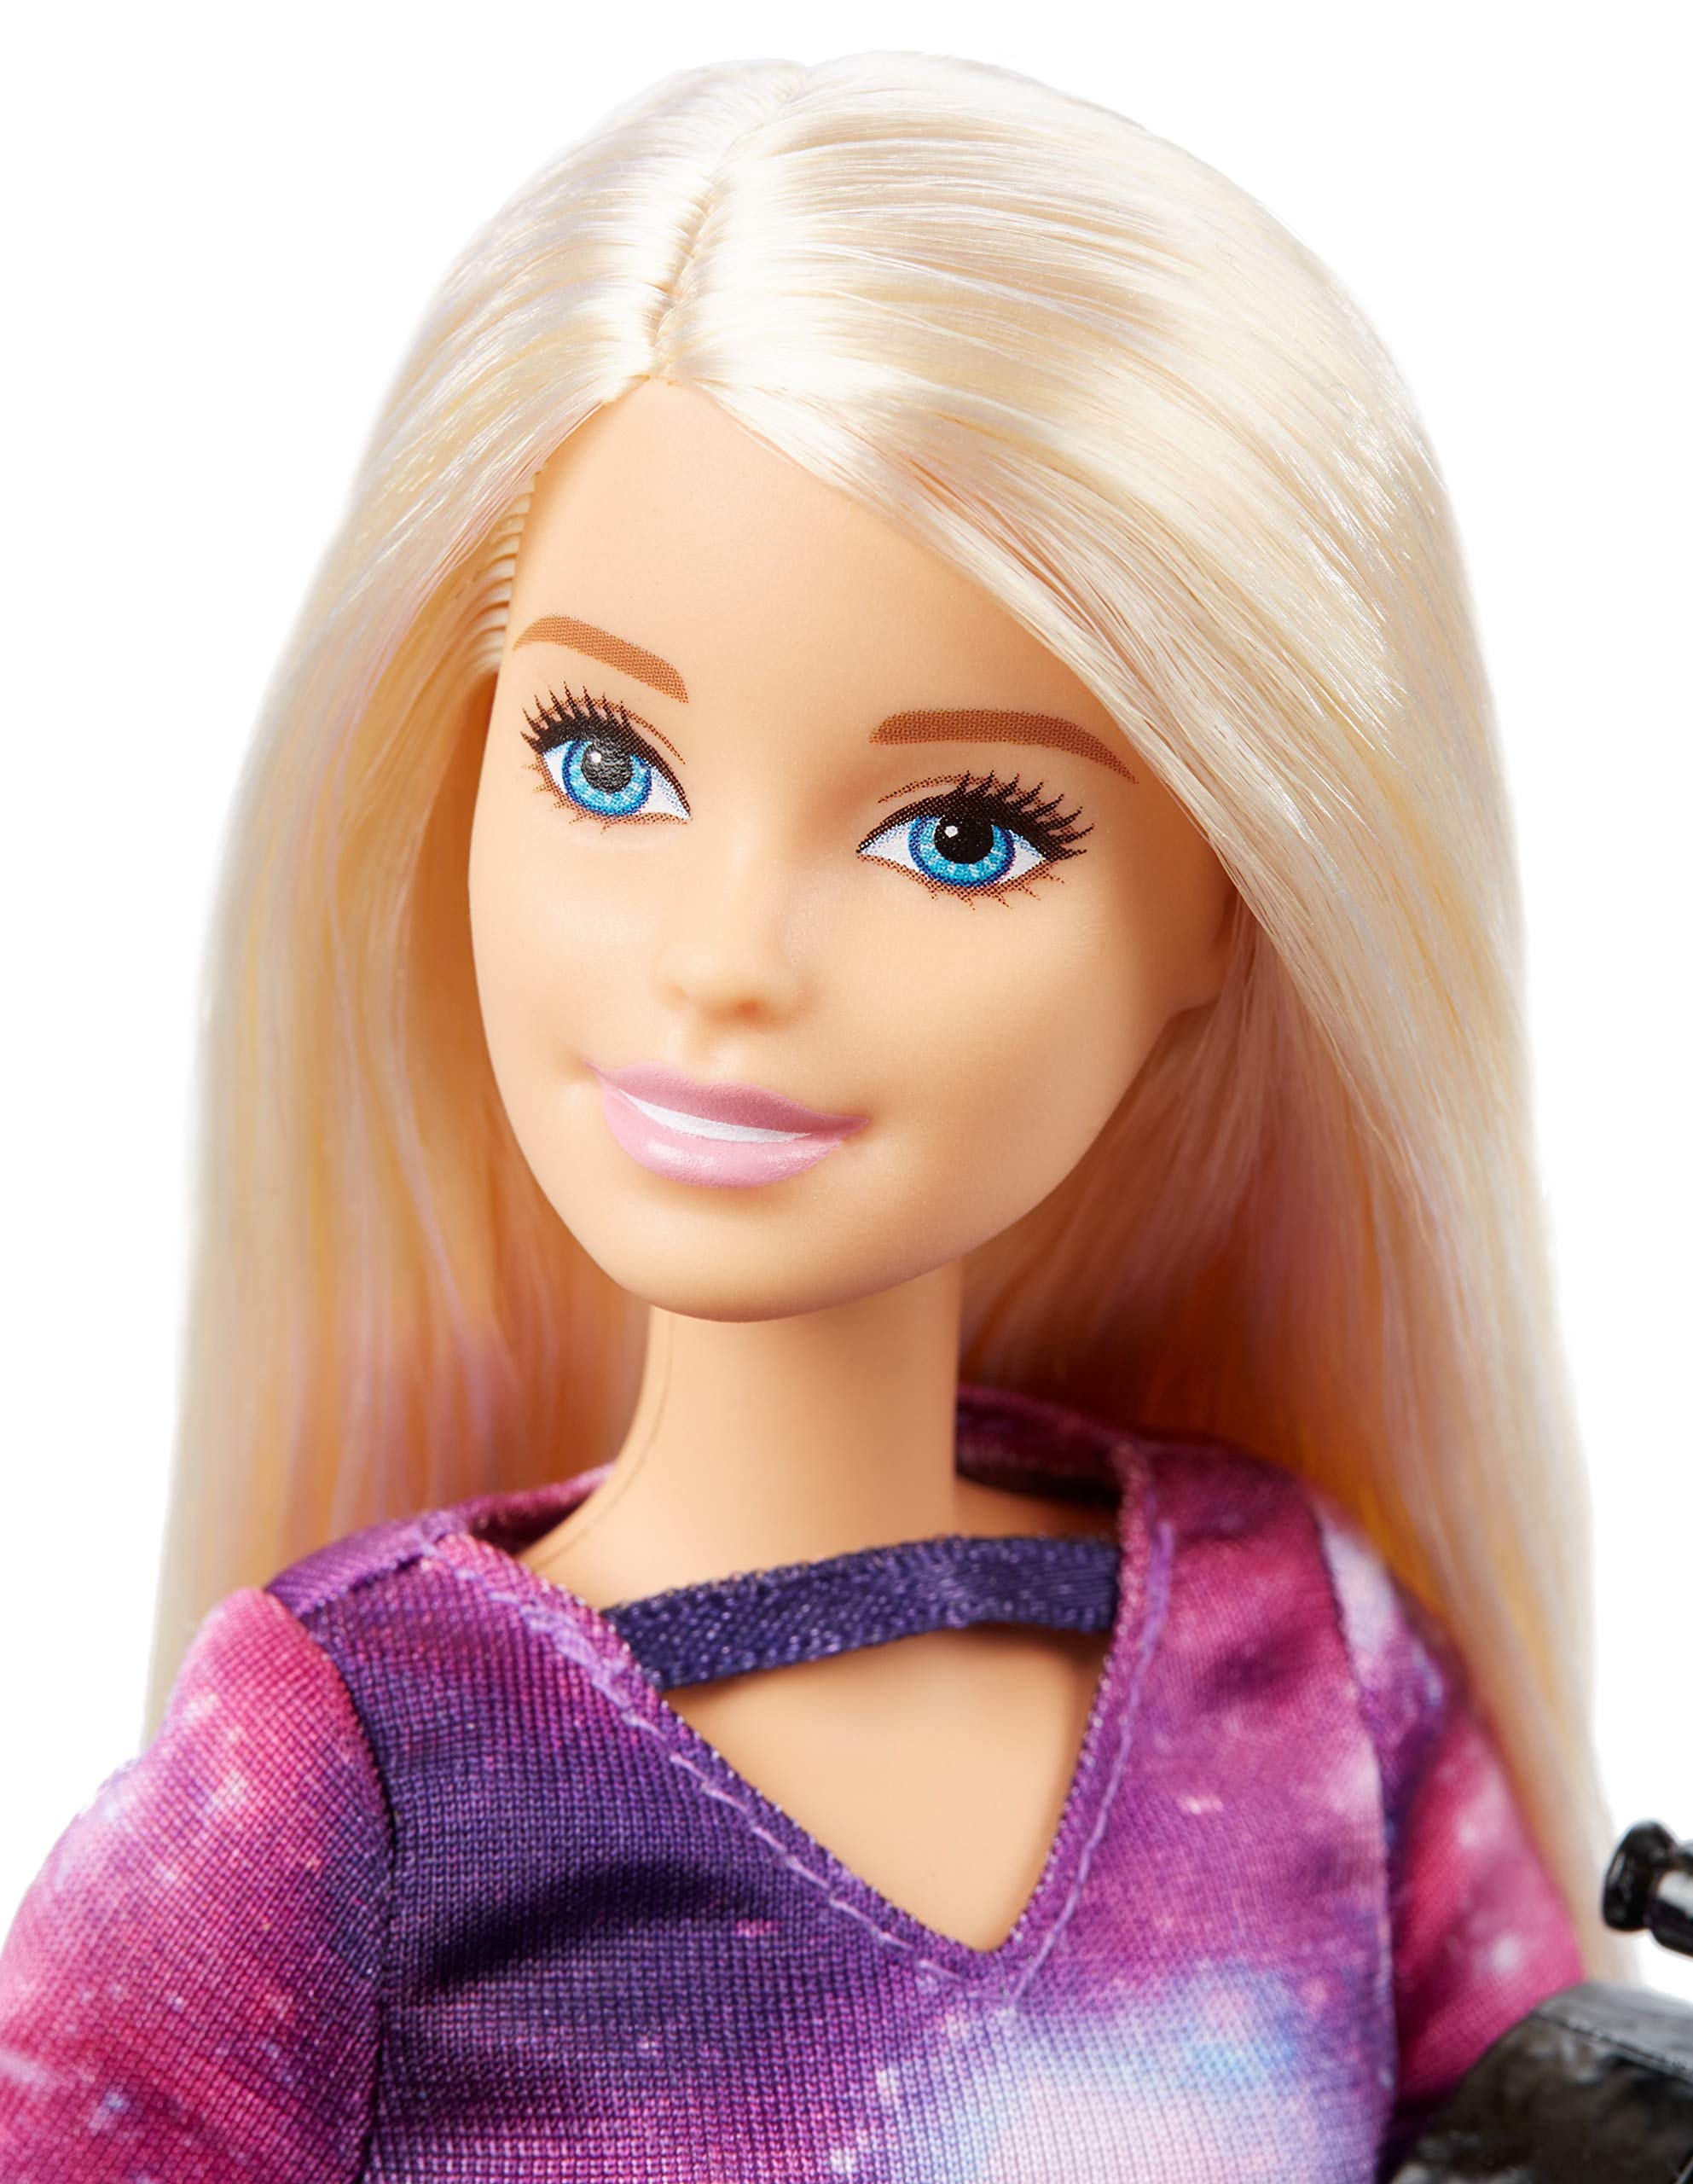 ​​Barbie Astrophysicist Doll, Blonde with Telescope and Star Map, Inspired by National Geographic